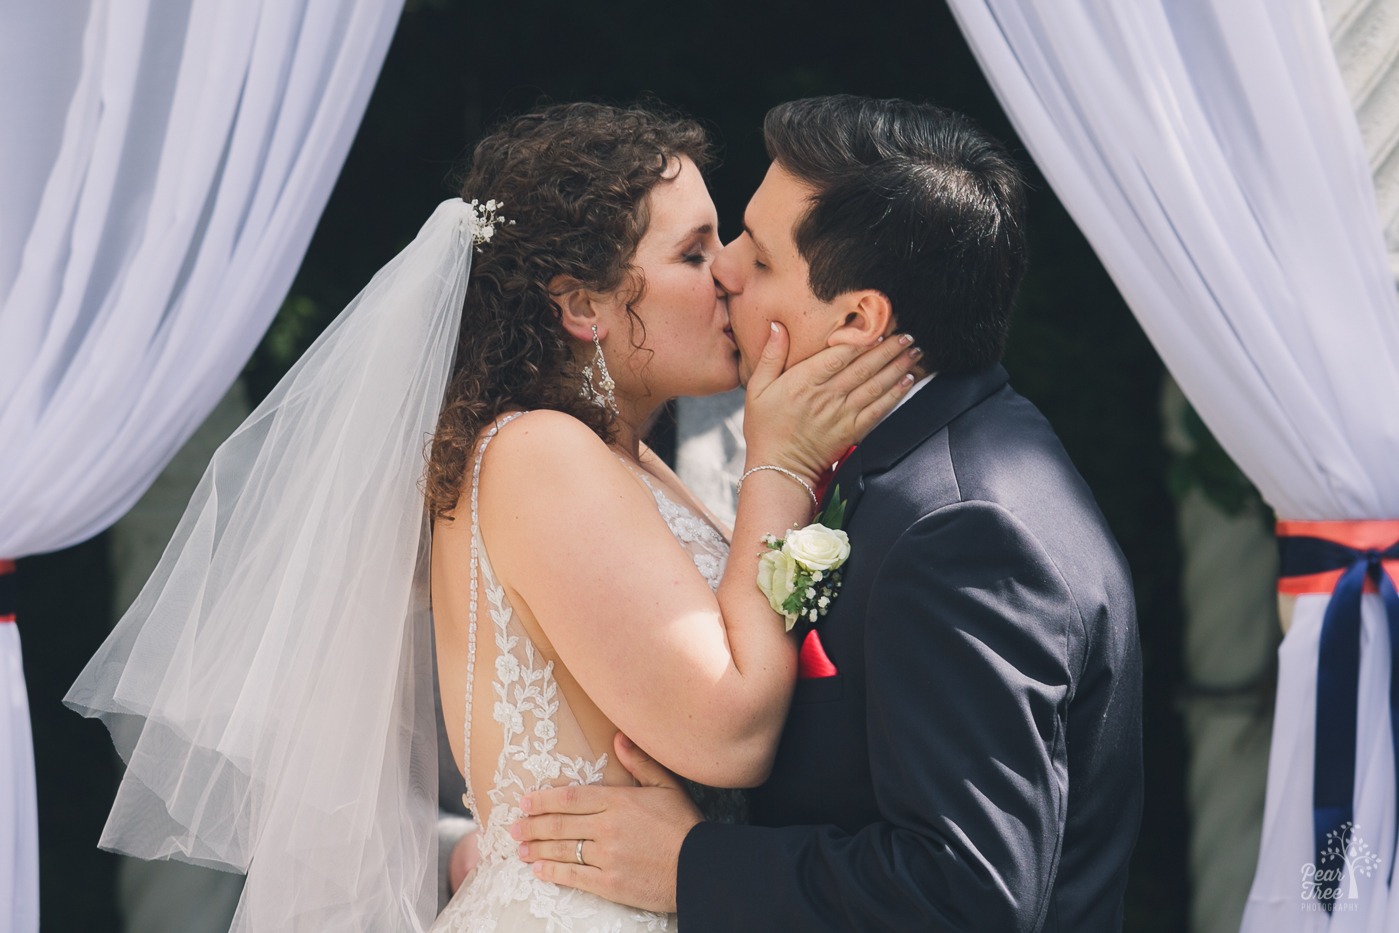 Bride and groom kissing at the end of their wedding ceremony at The Atrium.